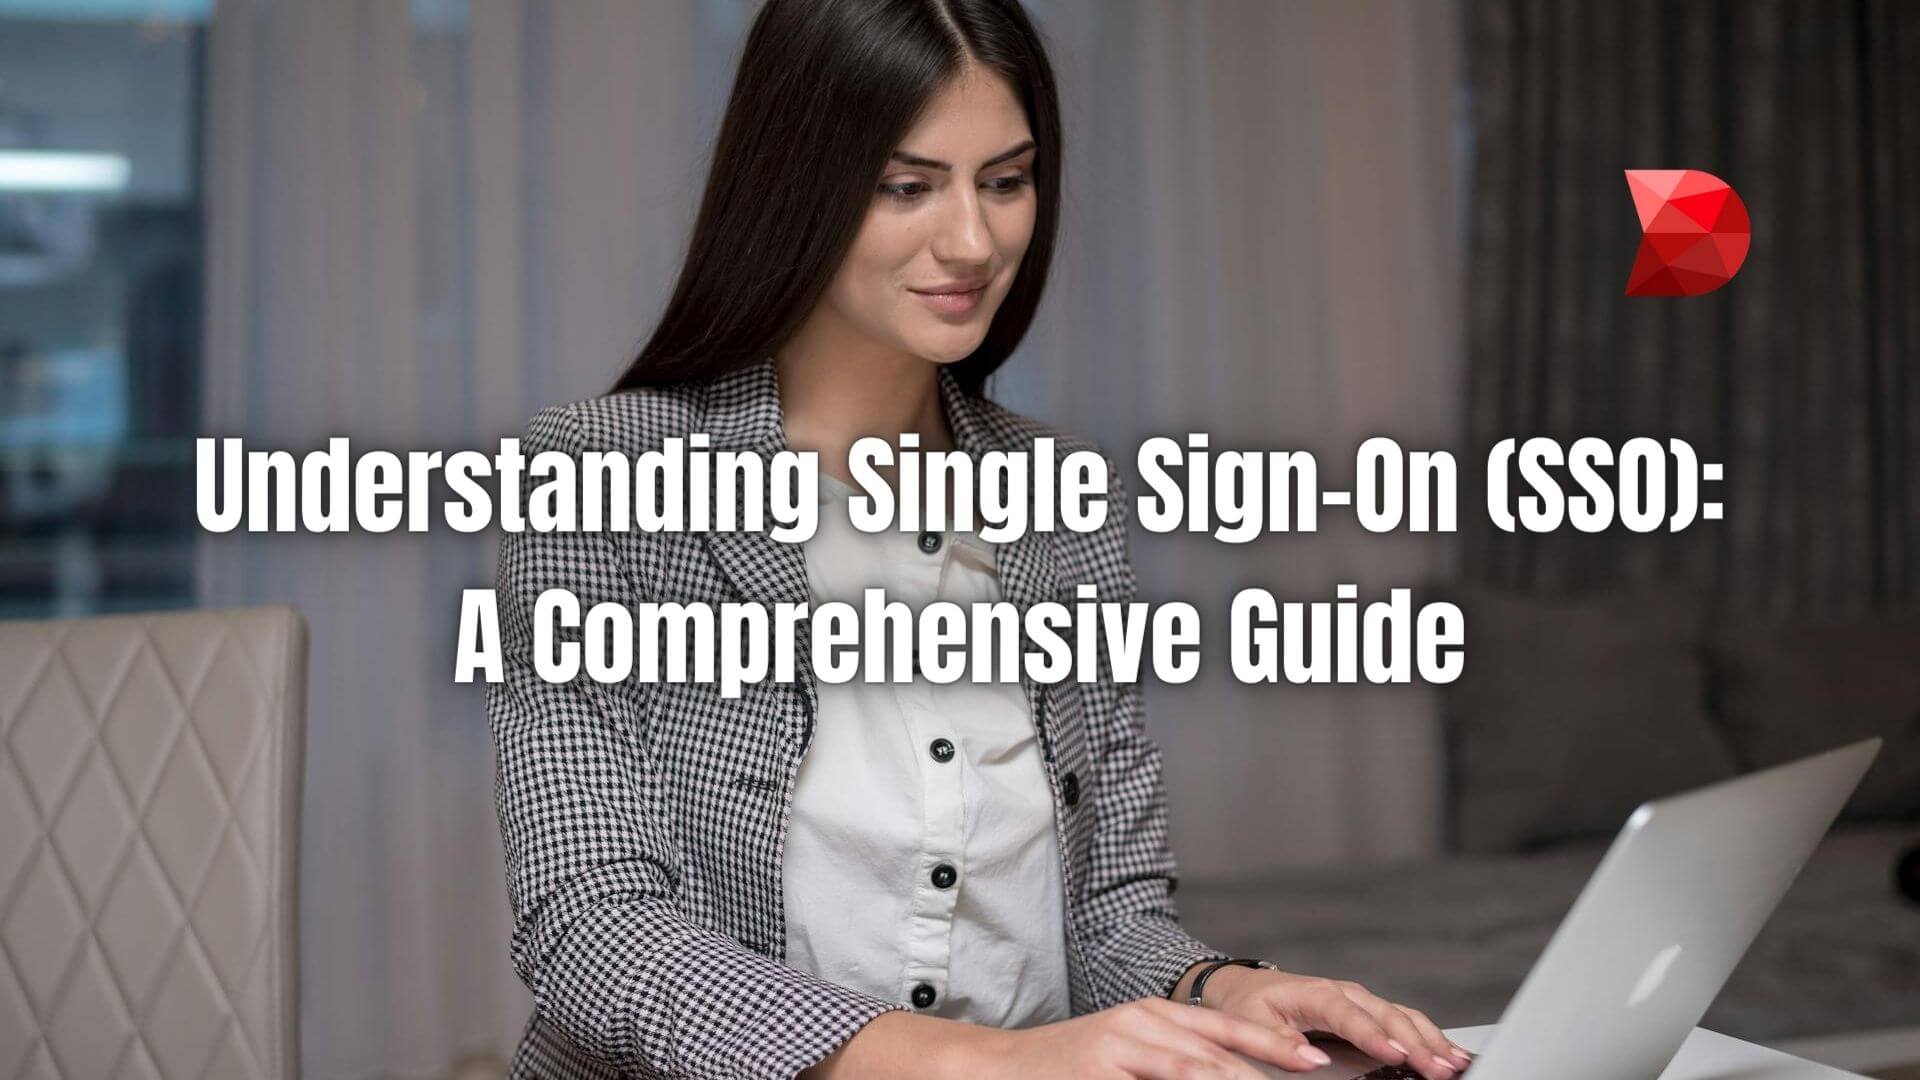 Unlock the power of Single Sign-On (SSO) with our comprehensive guide. Learn how the SSO machine streamlines access management effortlessly.